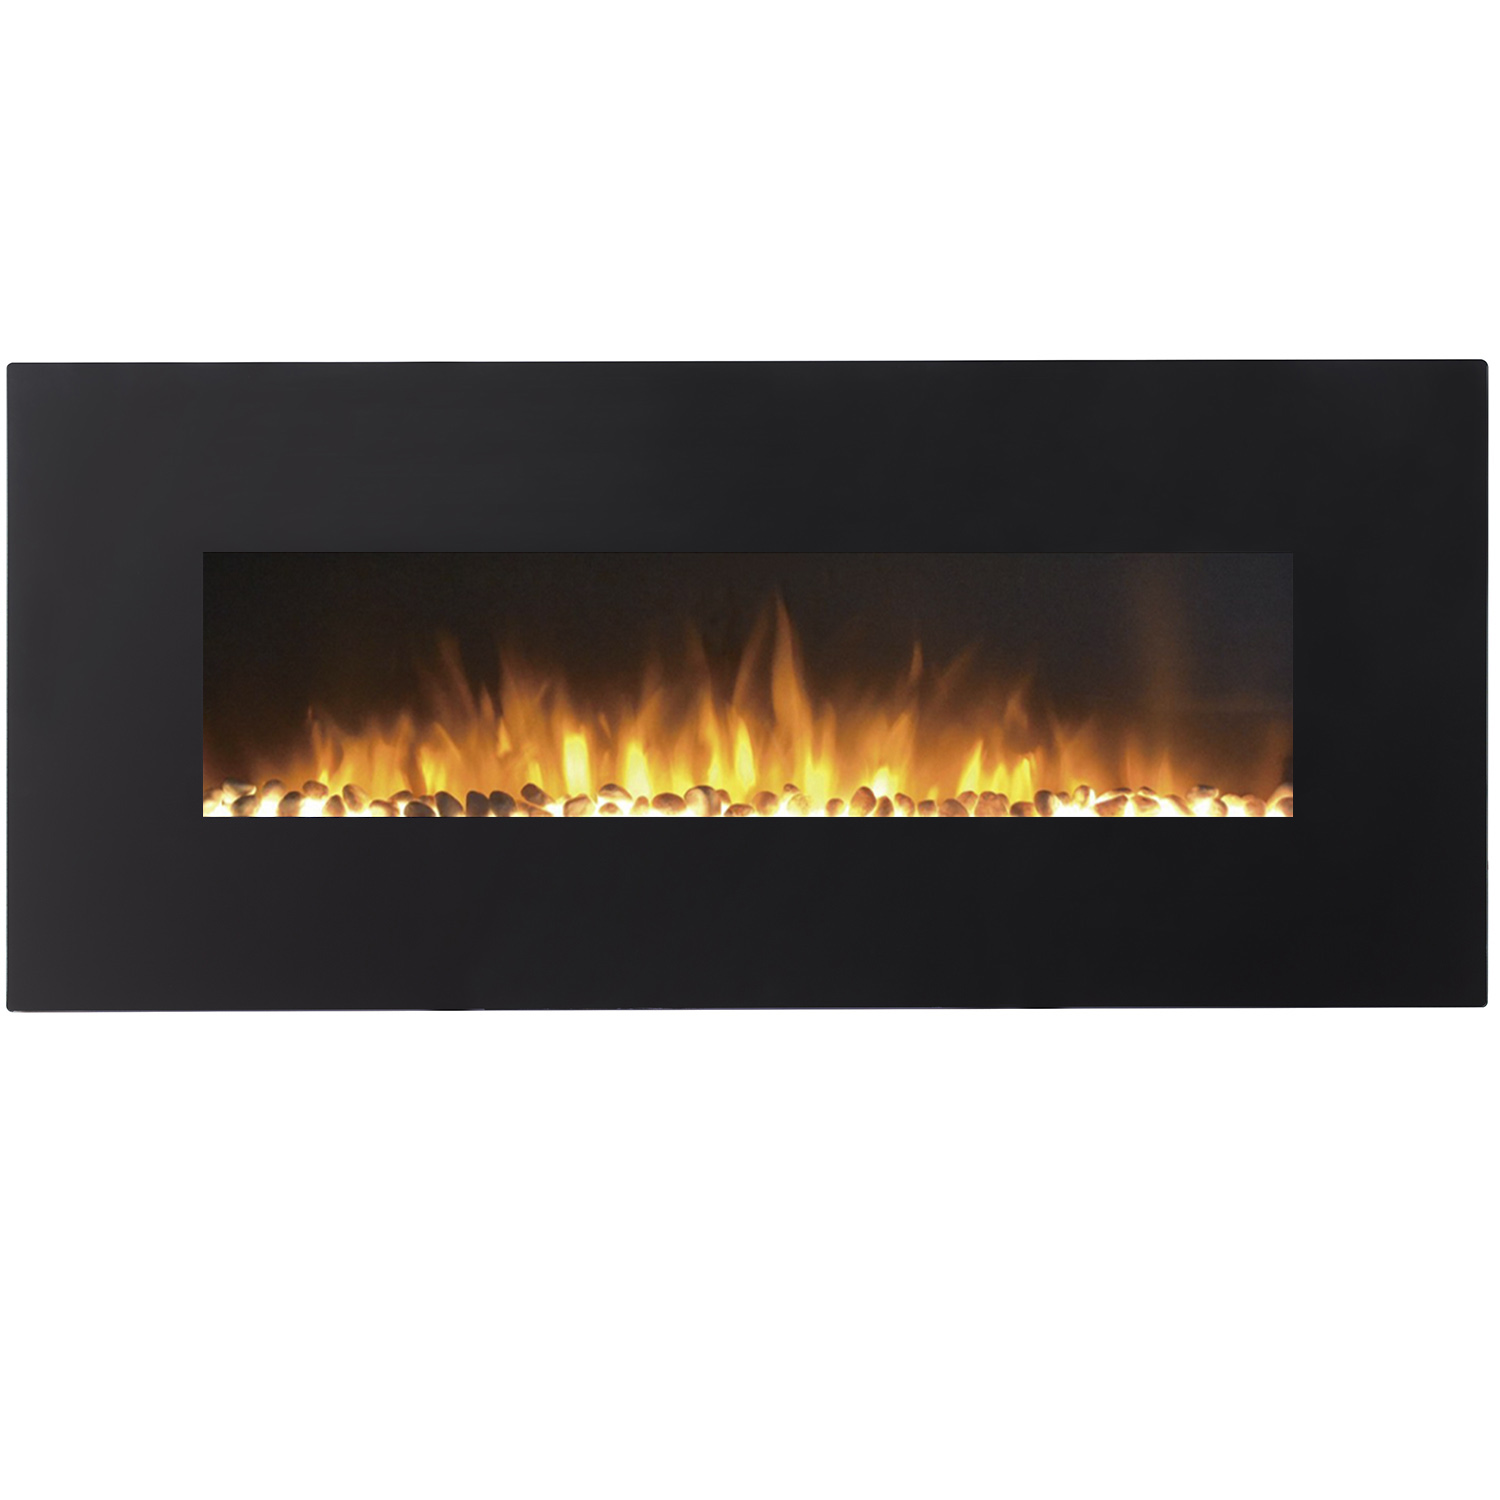 Regal Flame Huron Black 95 Pebble Ventless Heater Electric Wall Mounted Fireplace Better than Wood Fireplaces, Gas Logs, Firepl